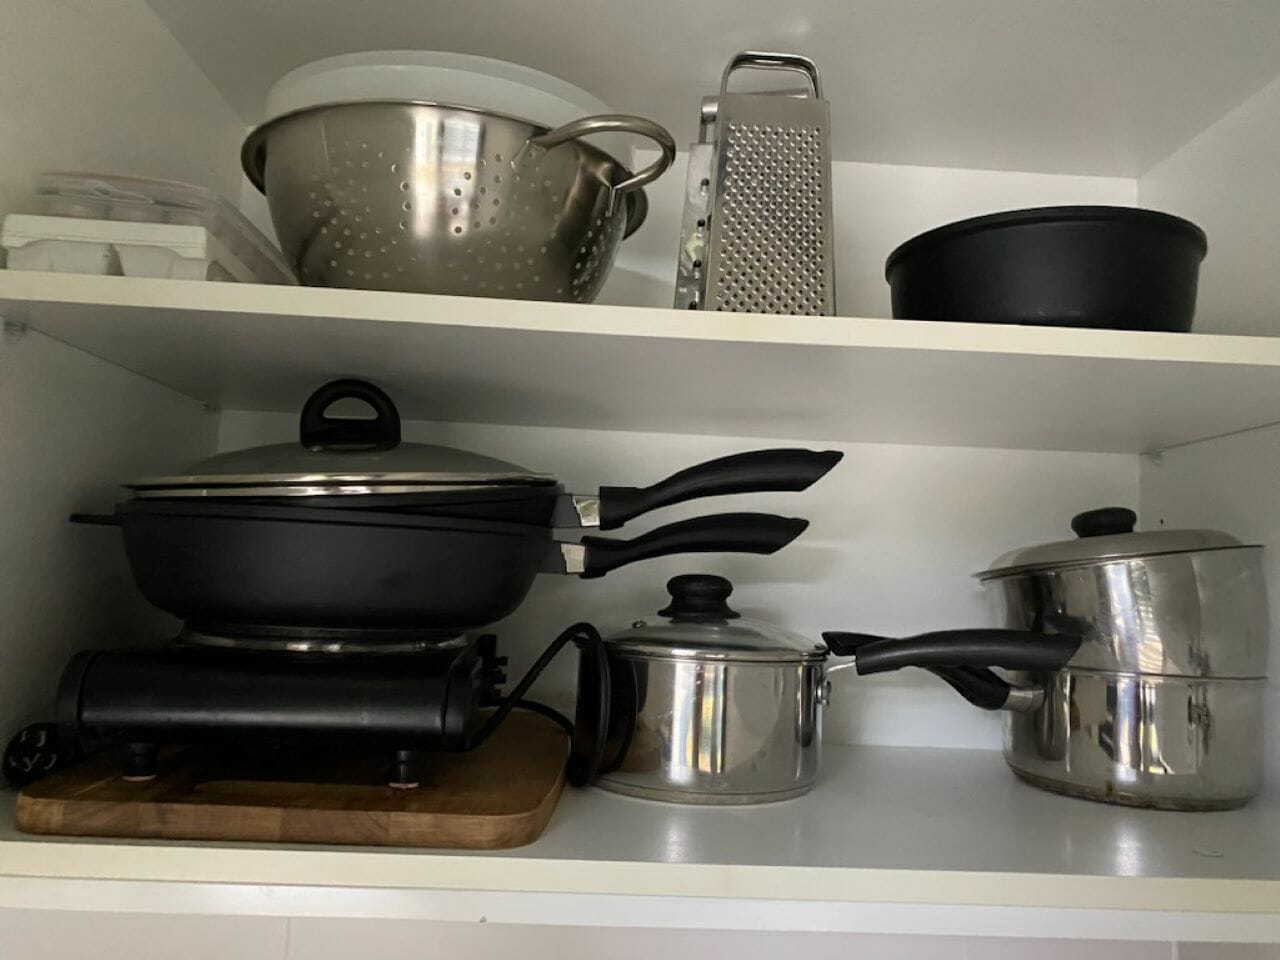 Kitchen cupboard with cookware